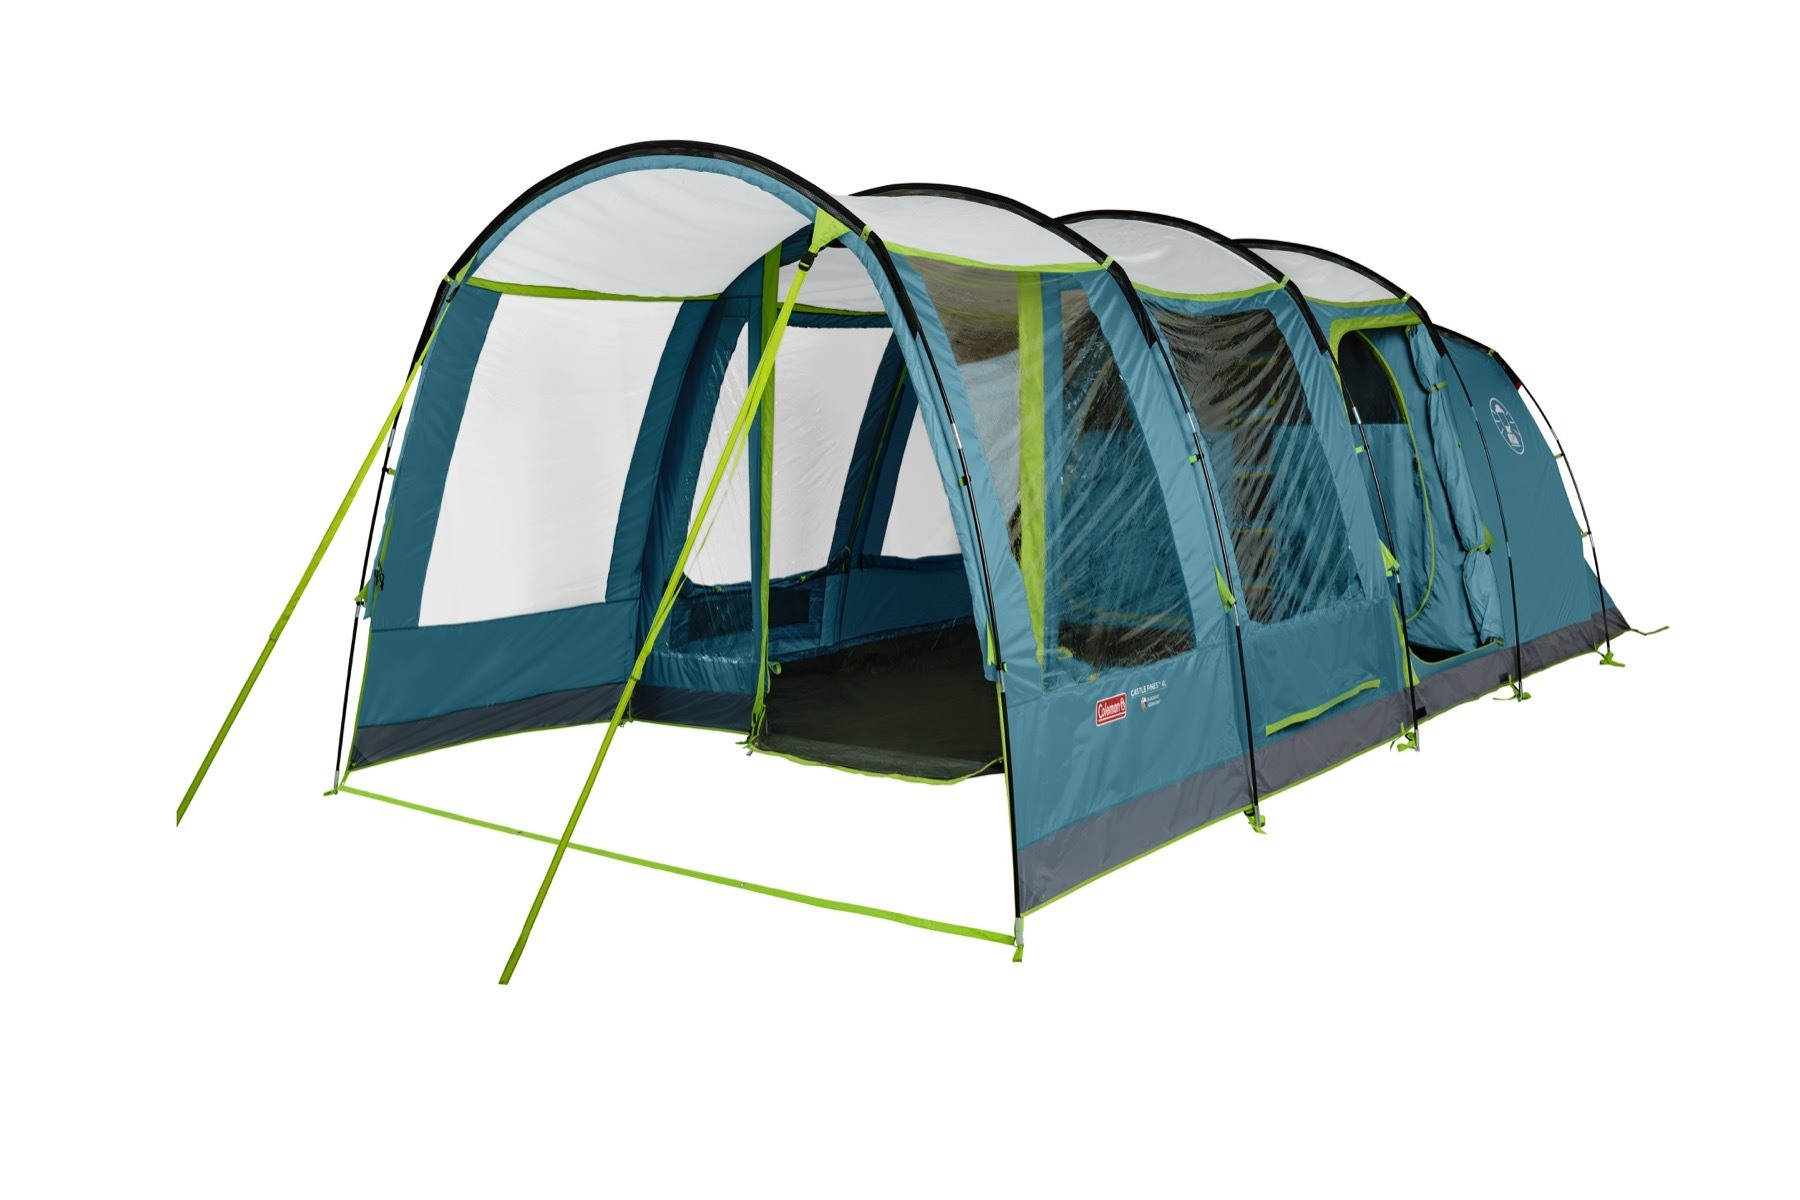 Side view of tent